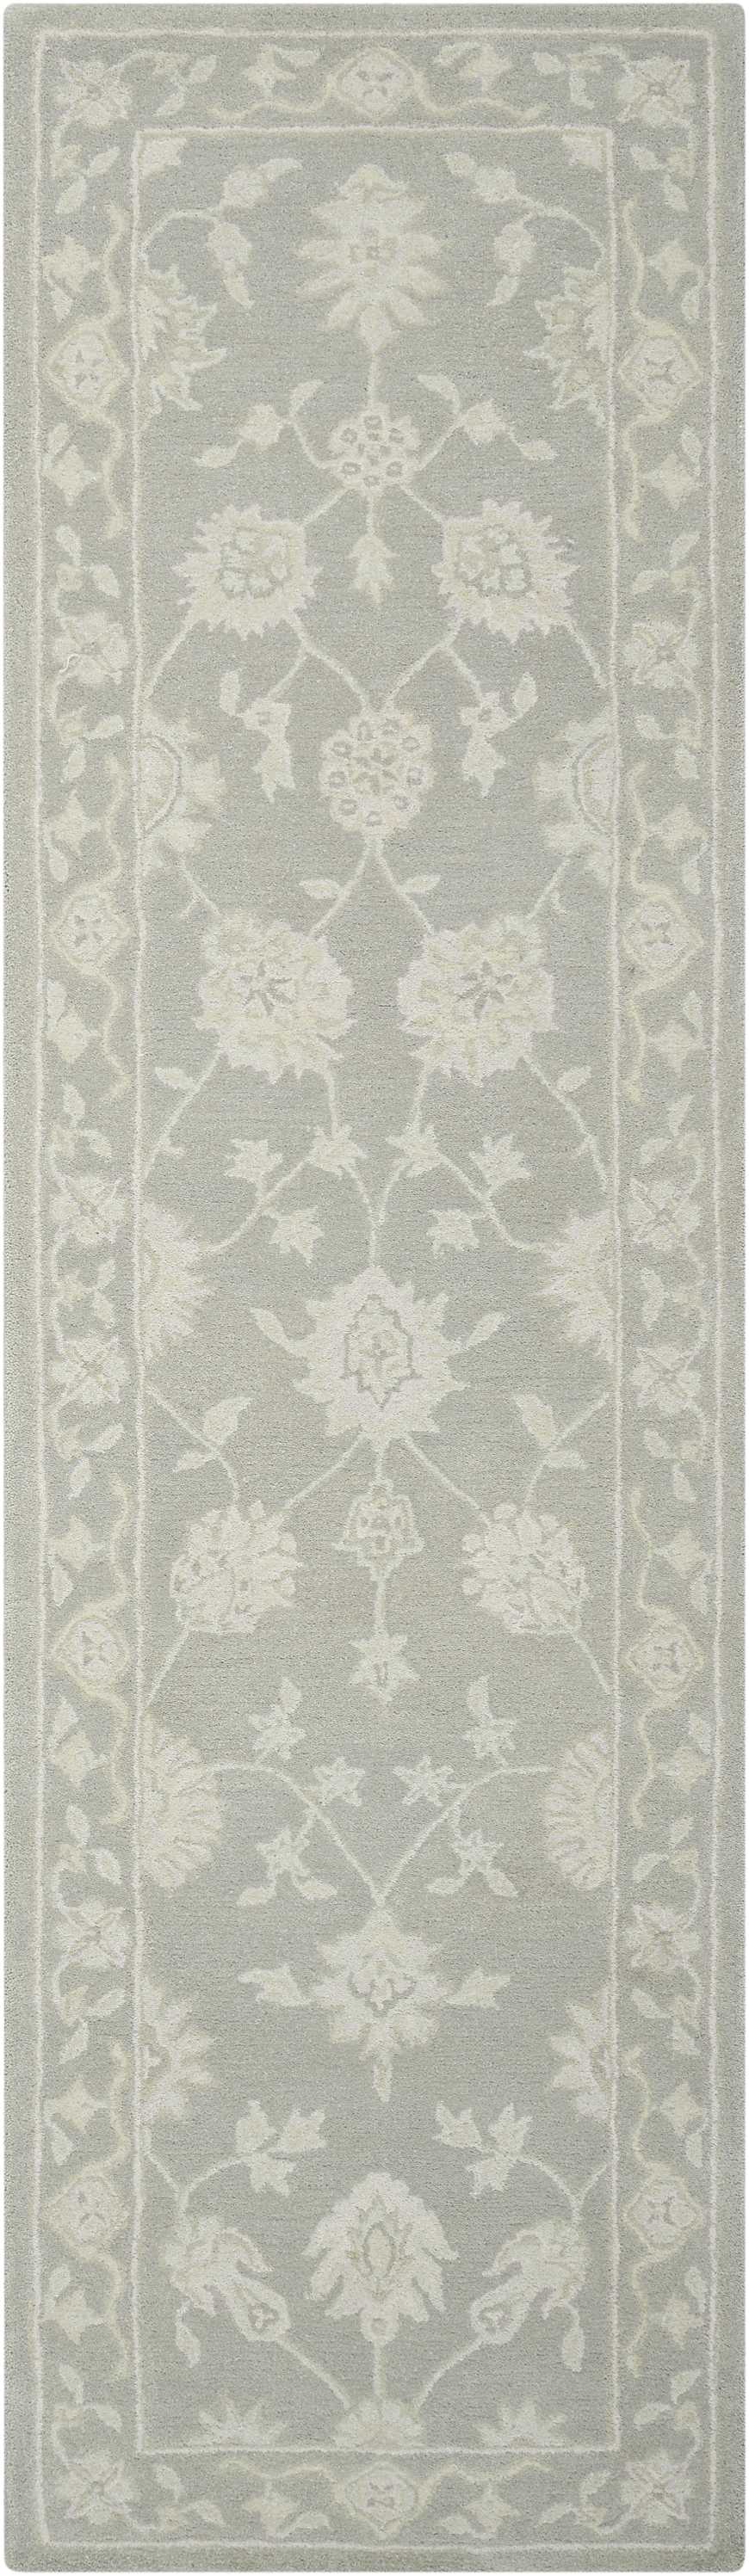 Nourison Home Zephyr ZEP02 Light Taupe Traditional Tufted Rug